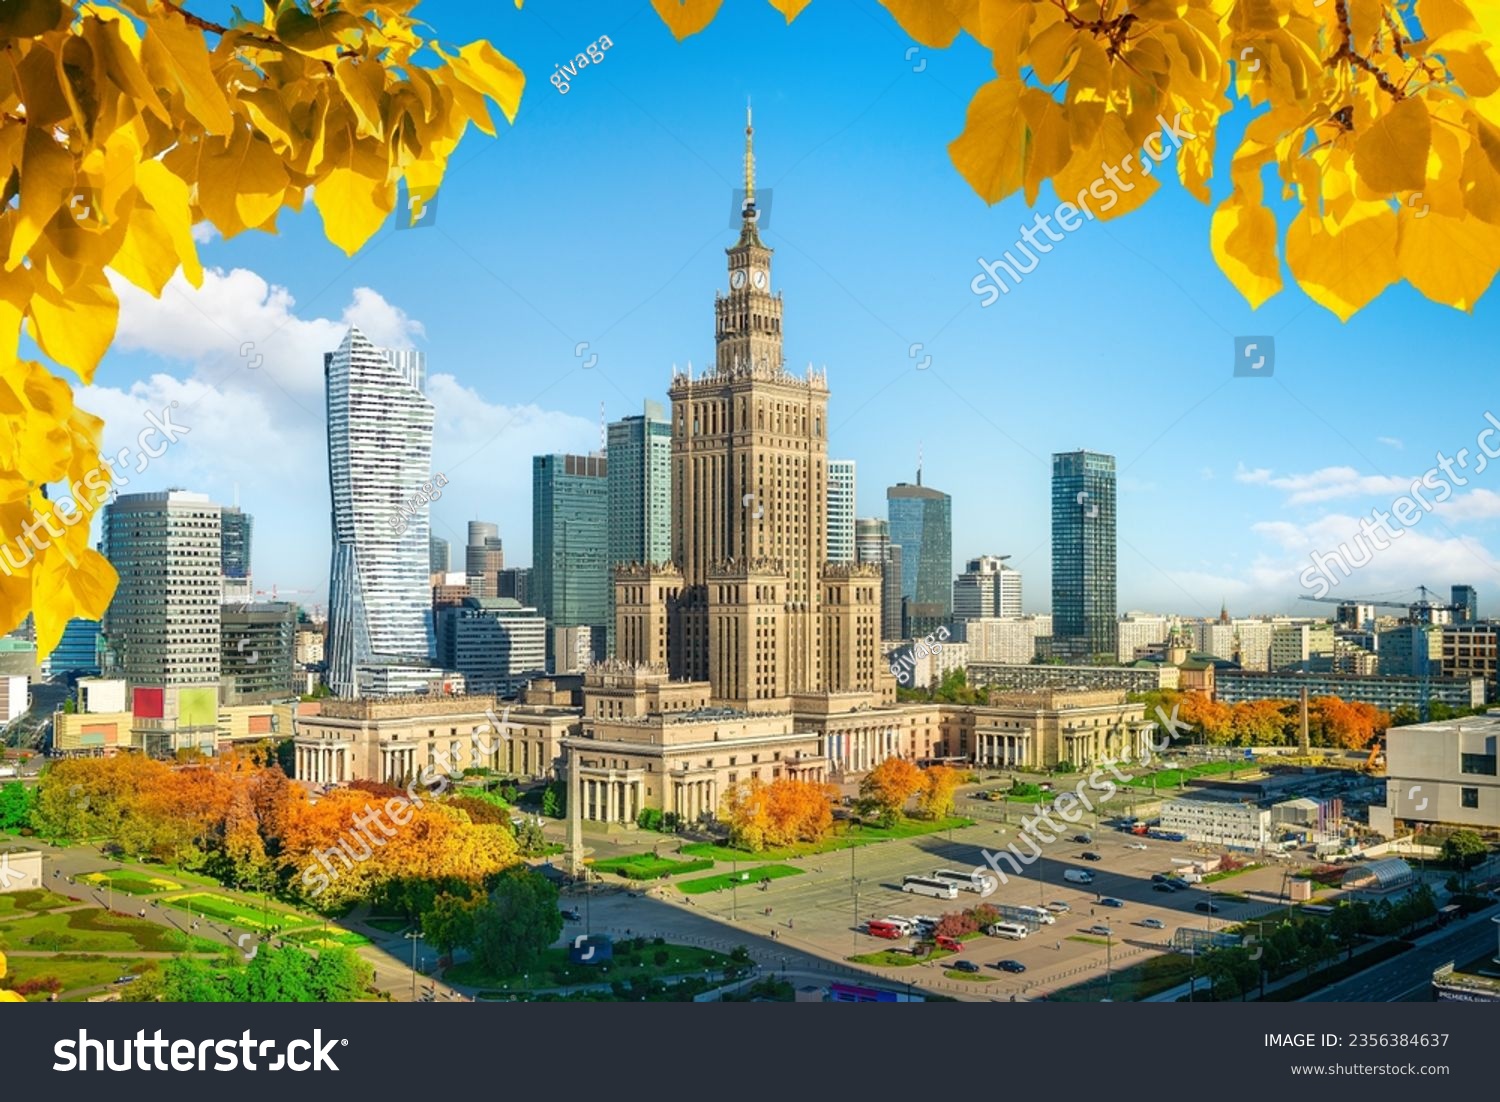 Autumn in Warsaw, top view of the Palace of Culture in Poland #2356384637